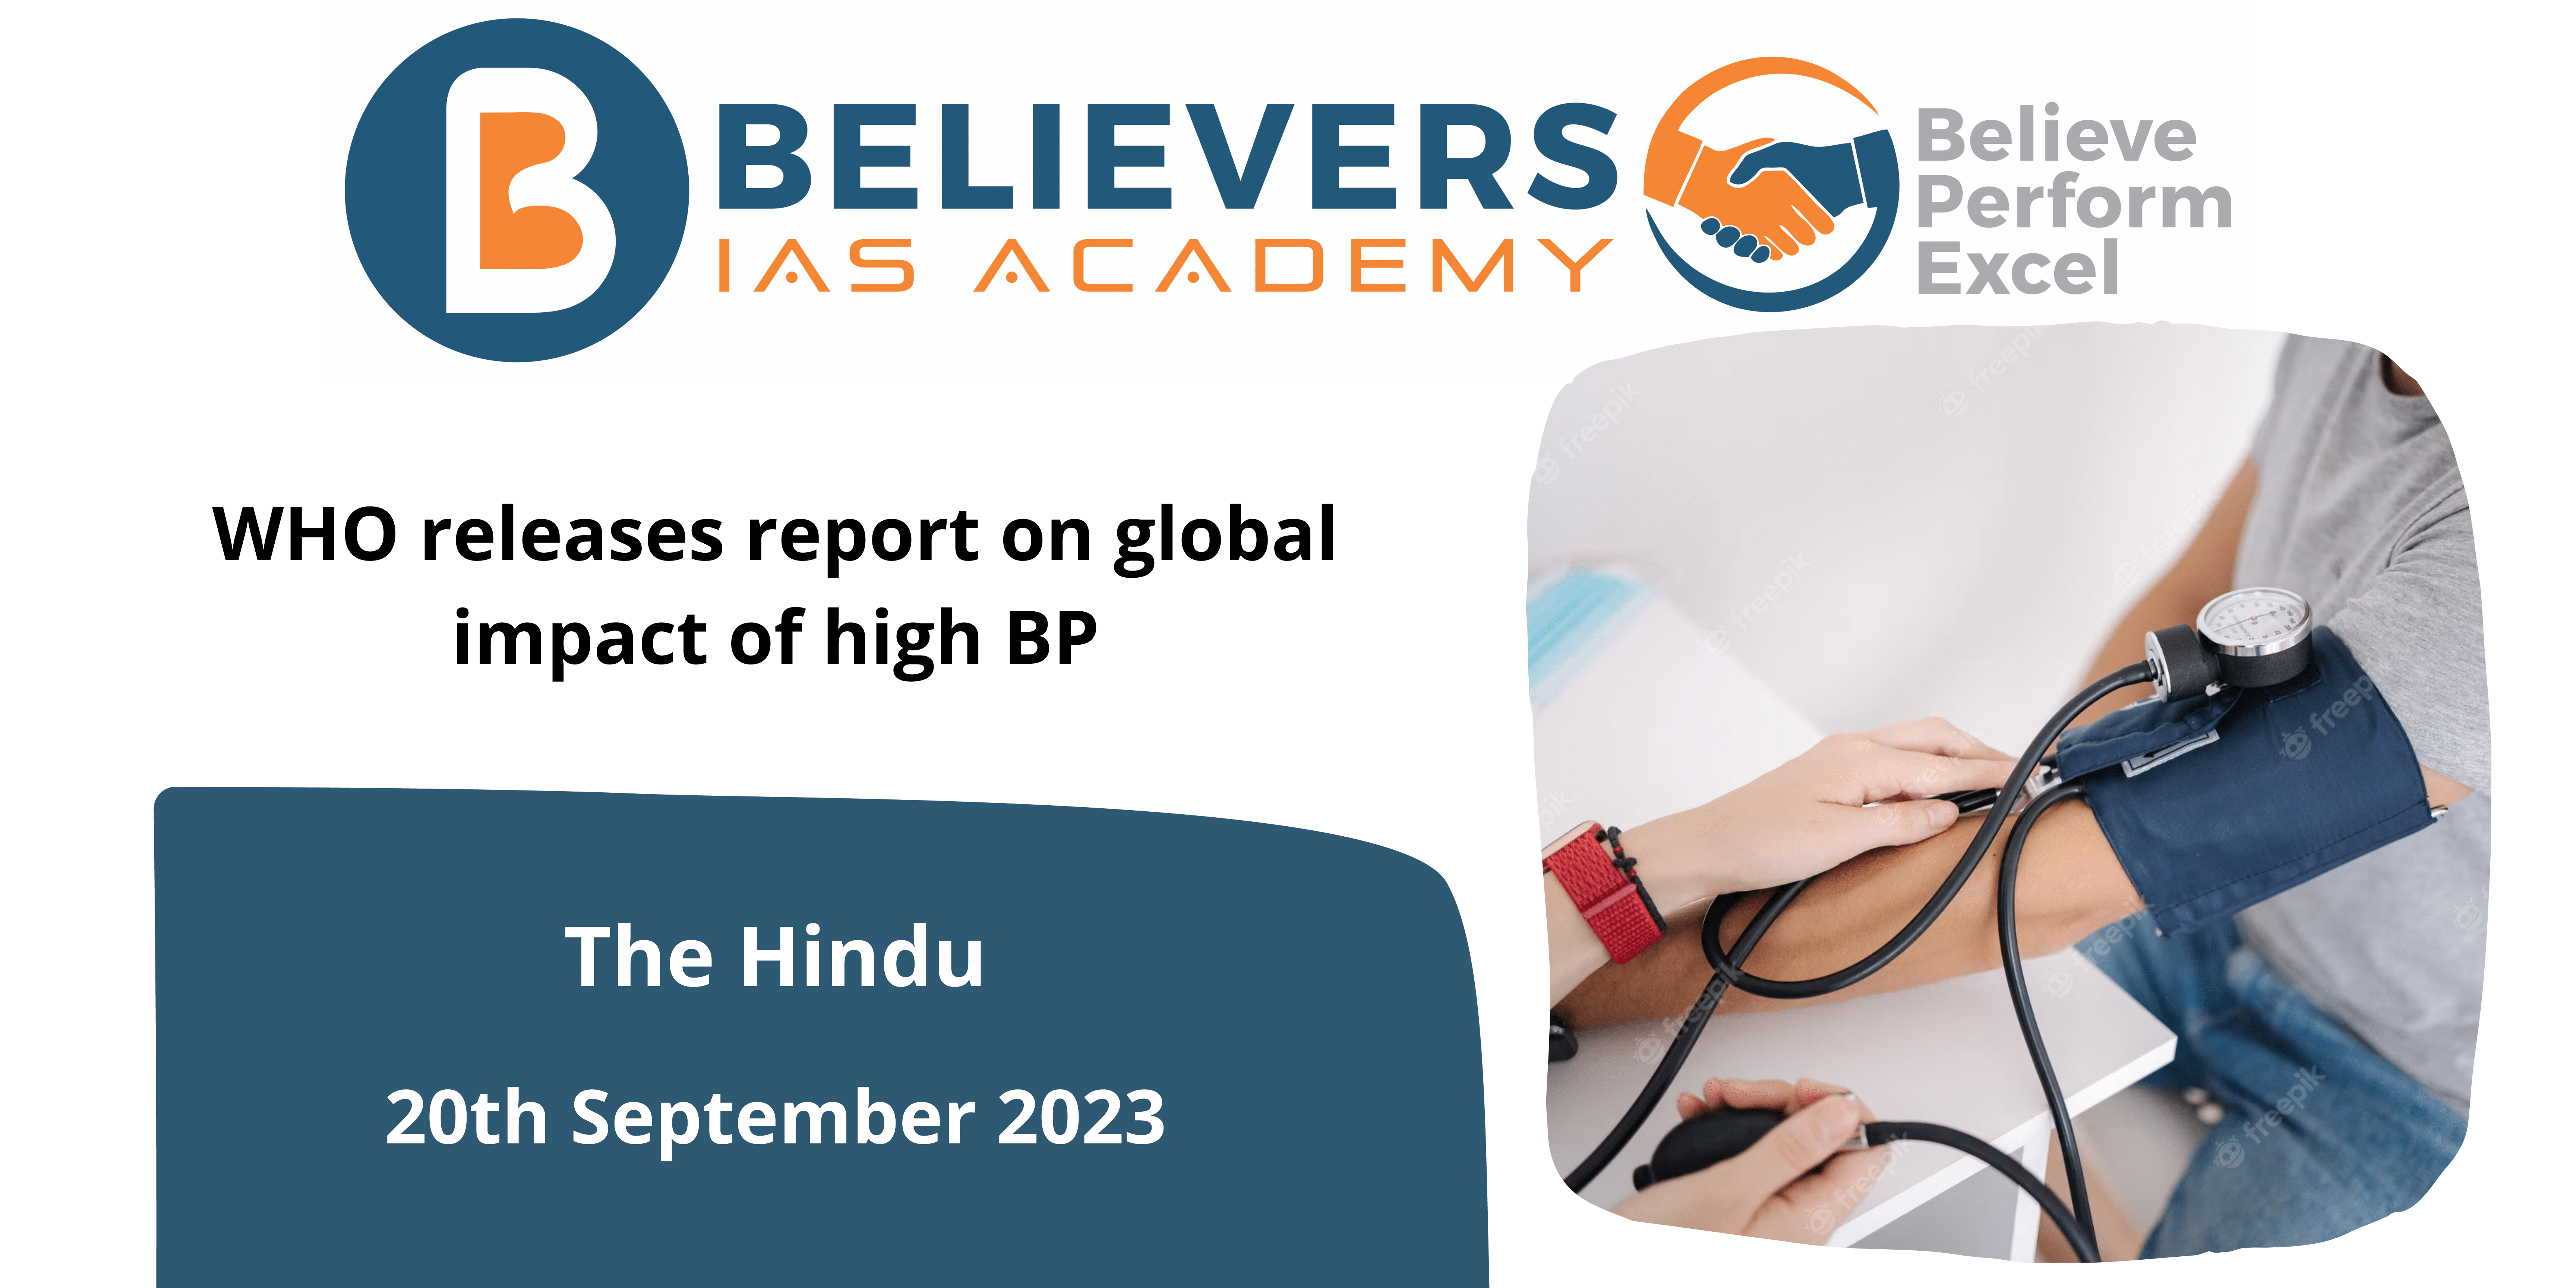 WHO releases report on global impact of high BP